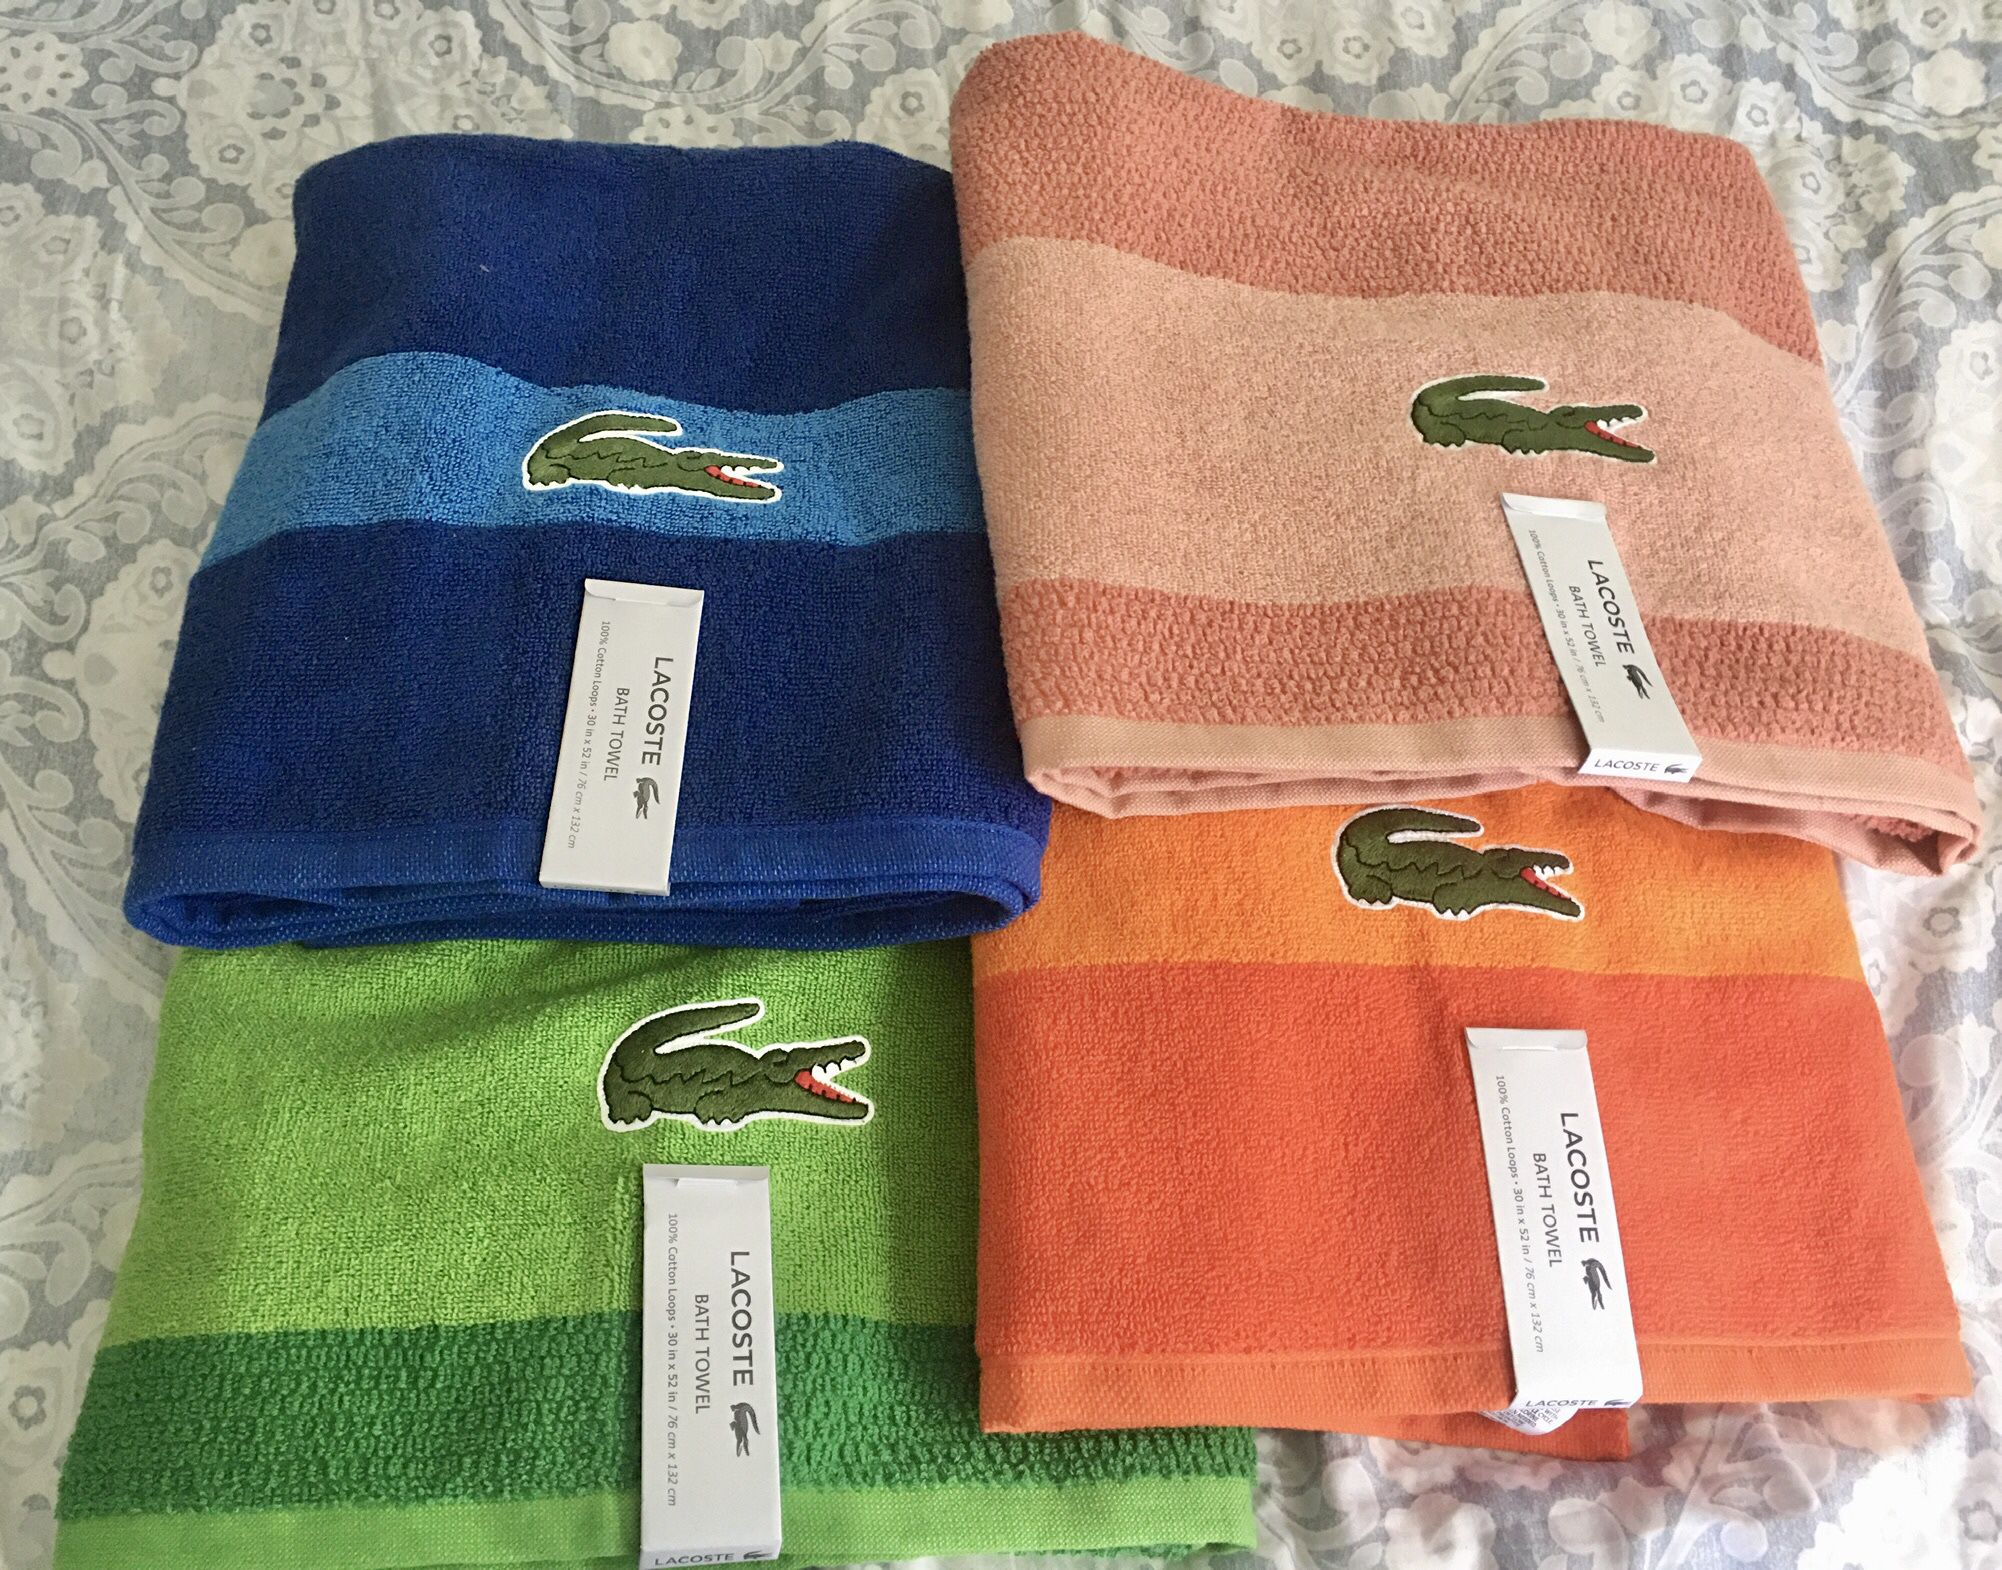 4 LaCoste Beach Towels 54 X 30 Inches for Sale in Rohnert Park, CA